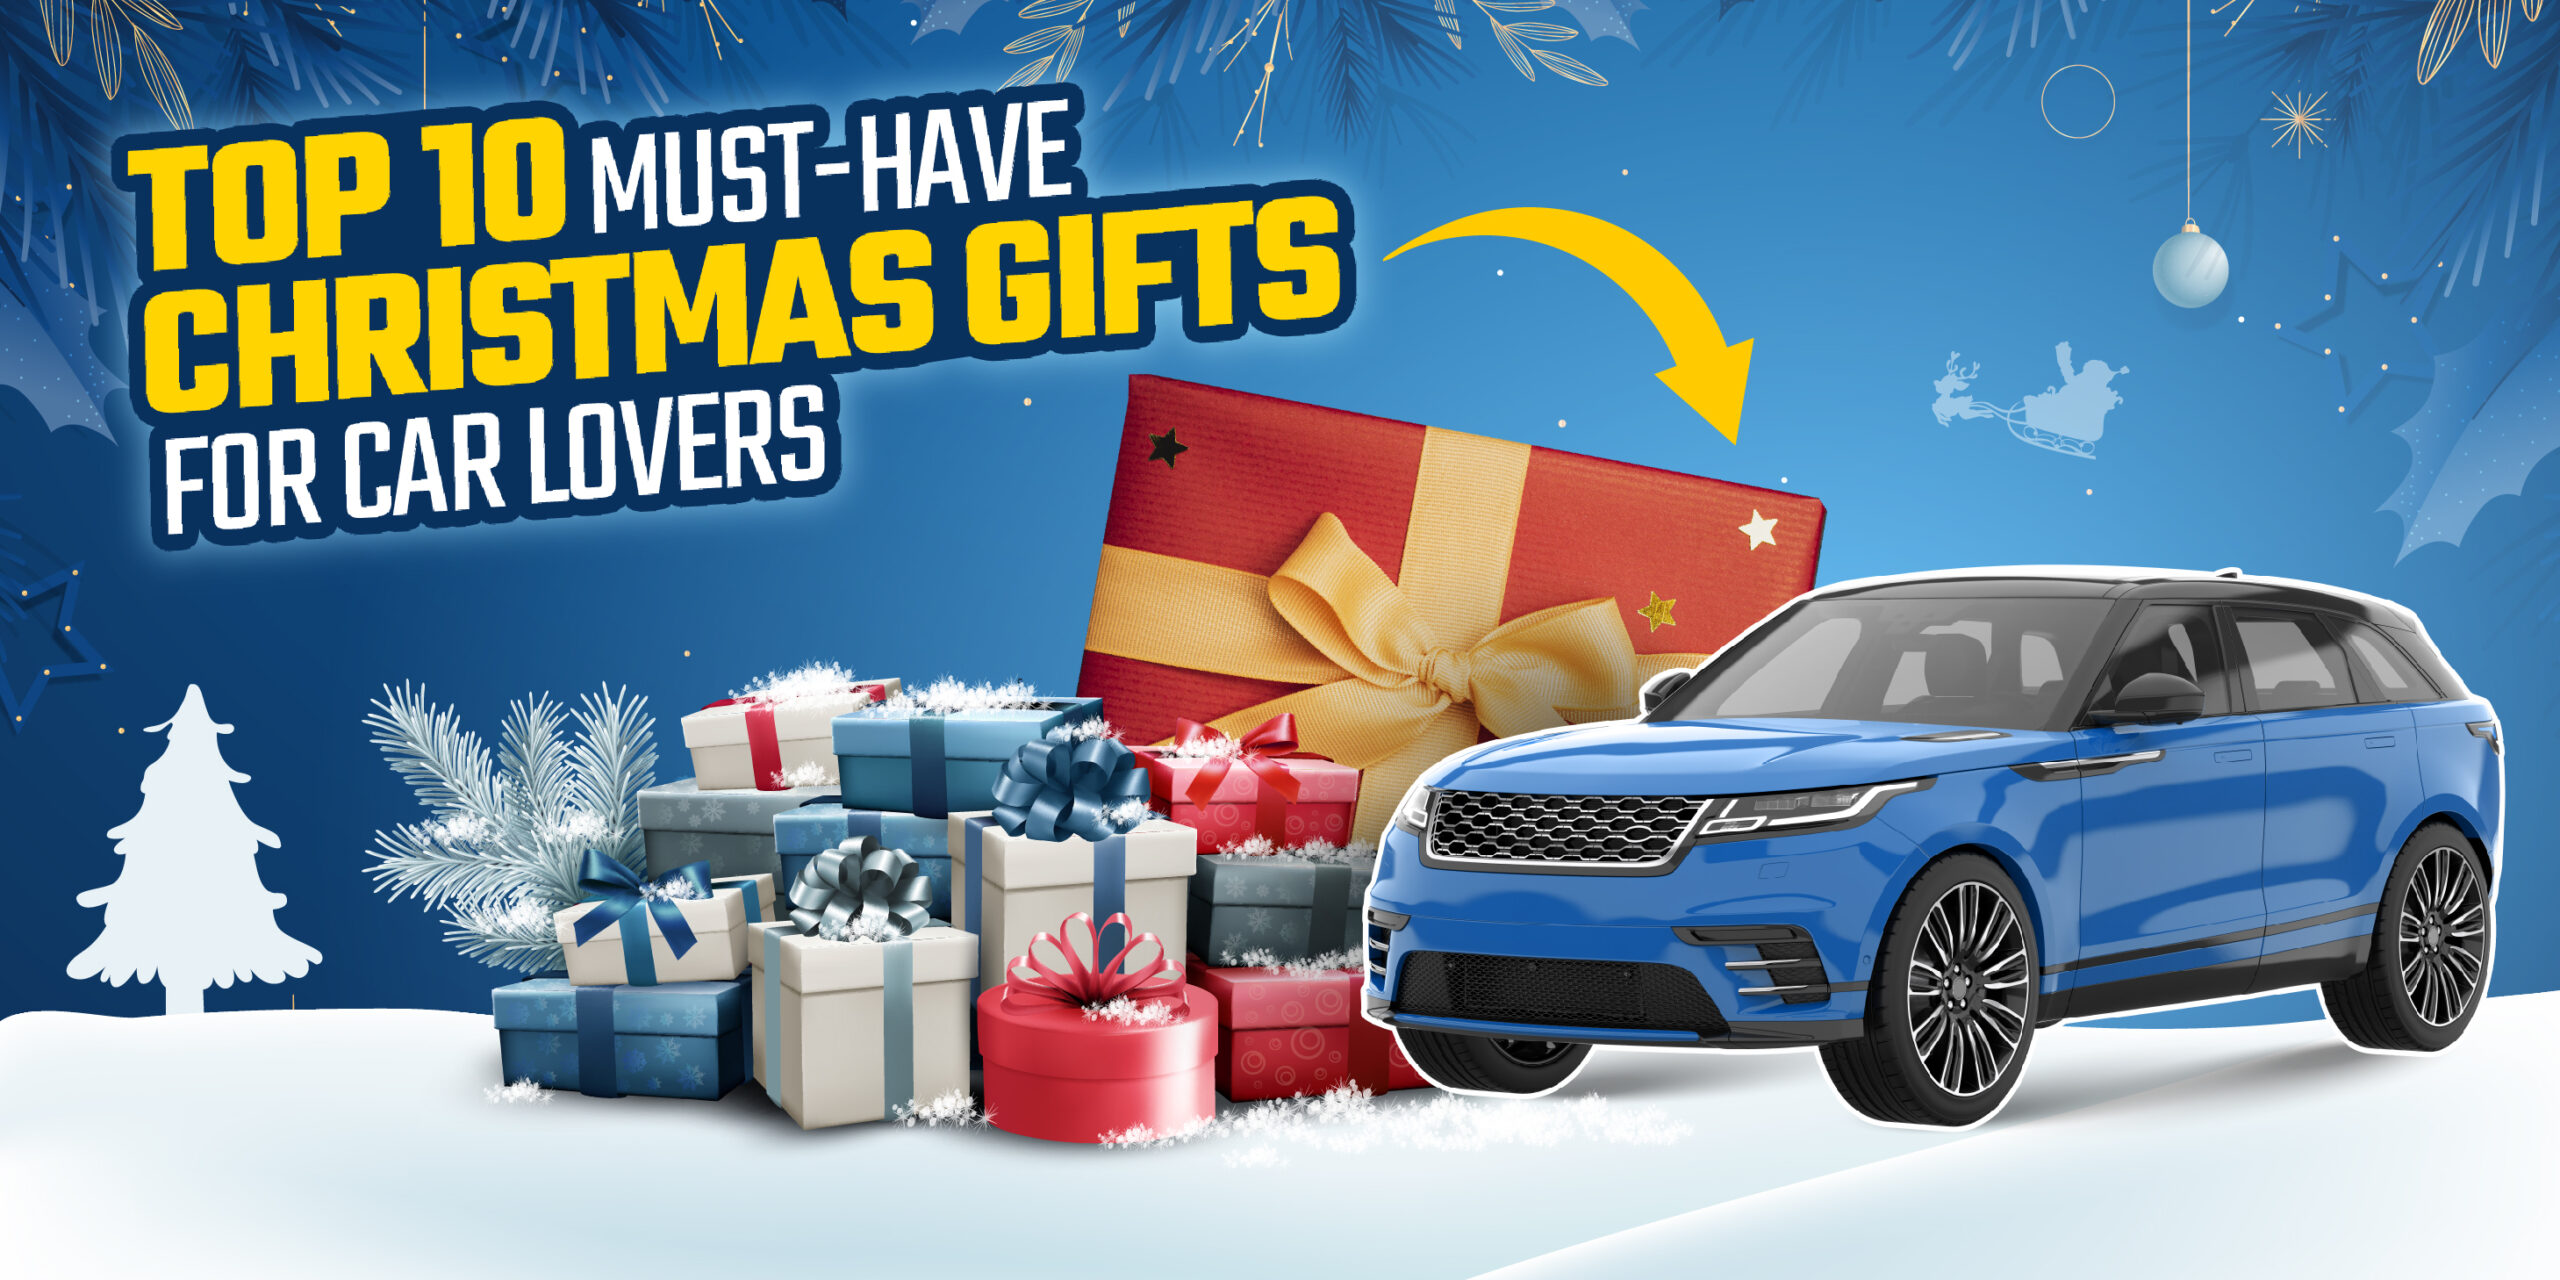 Top 10 Christmas Gift Ideas for Car Lovers